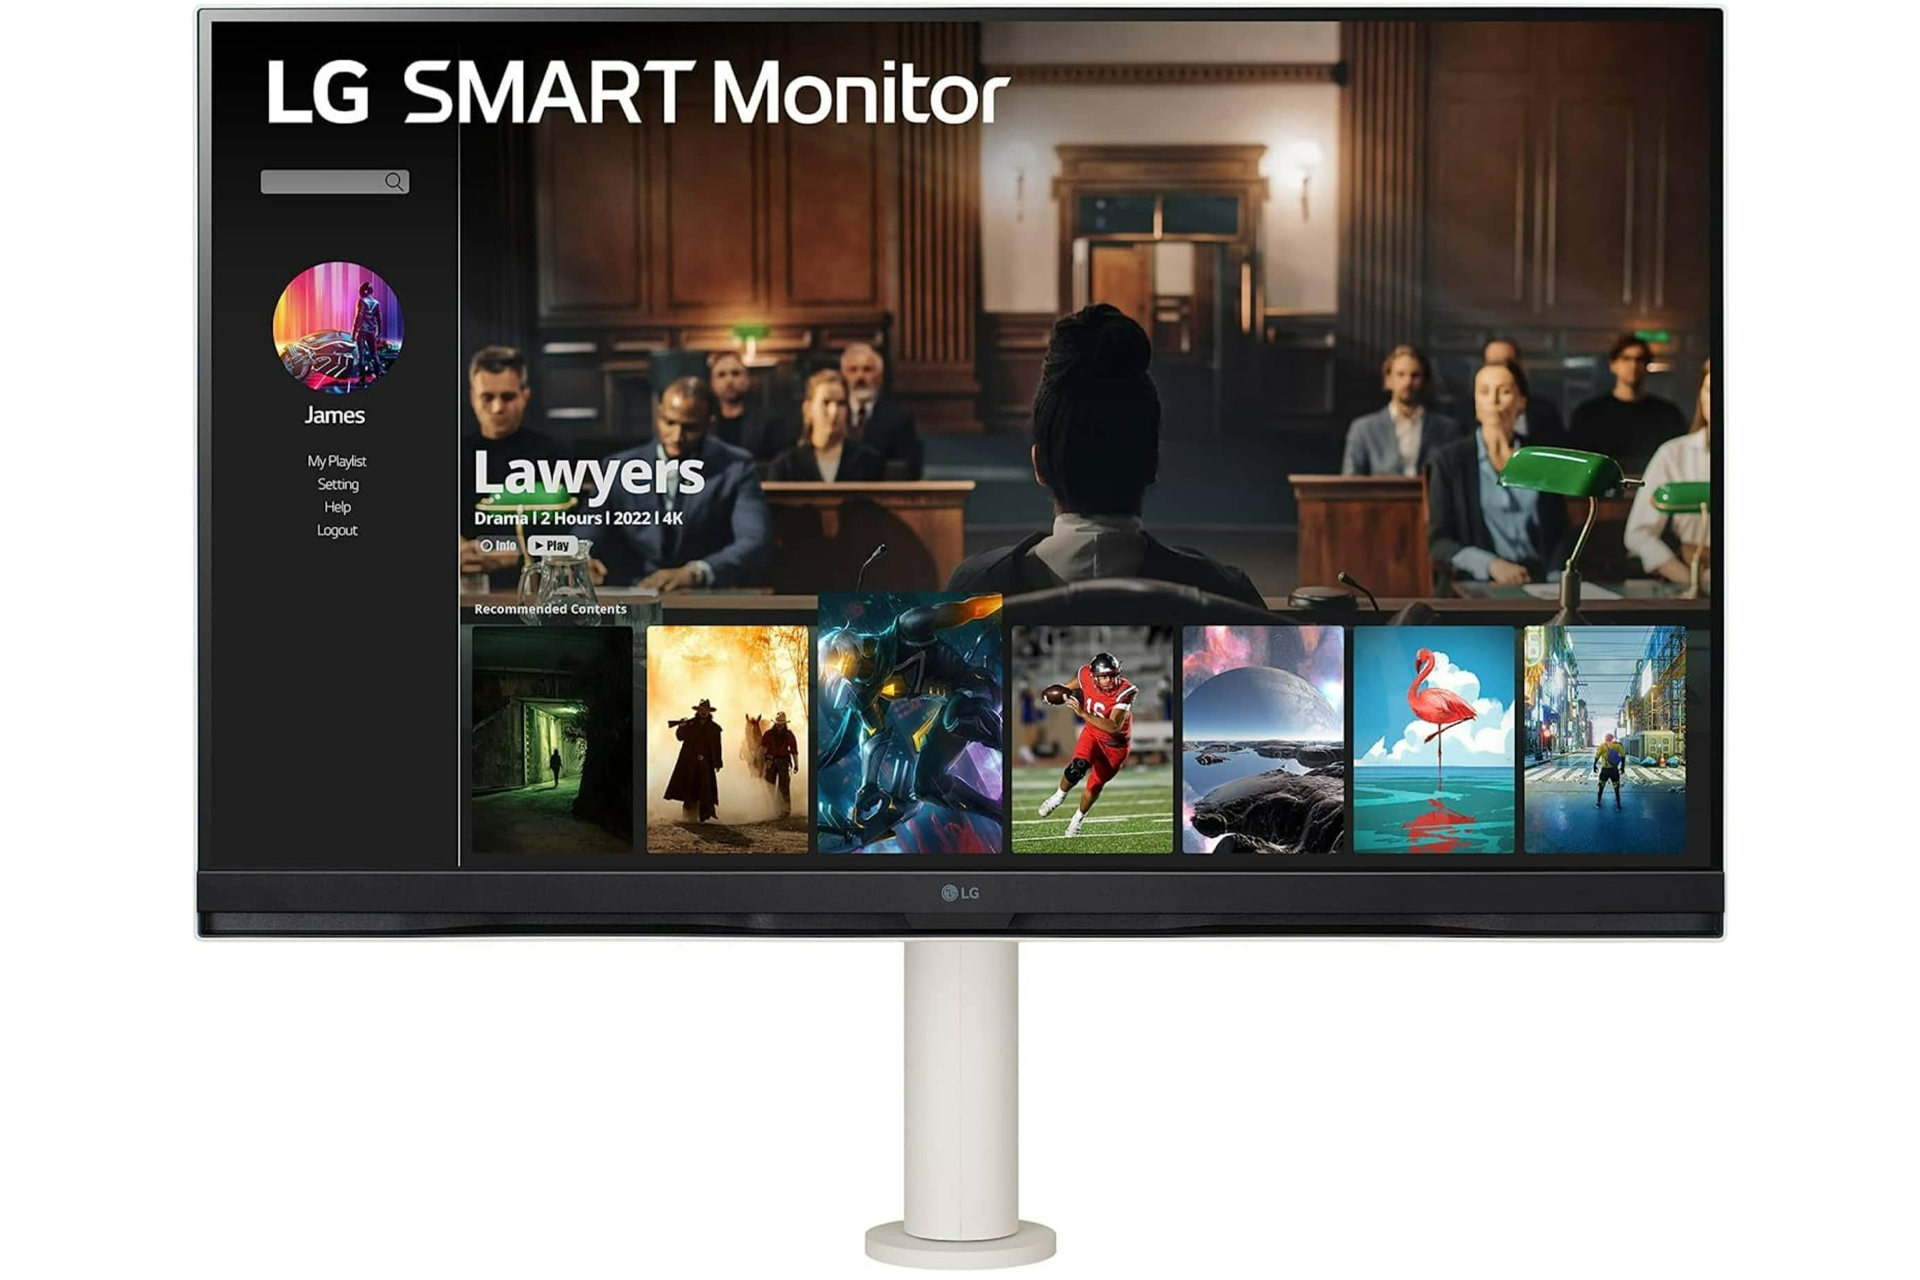 LG's first smart monitor LG 32SQ780S front view